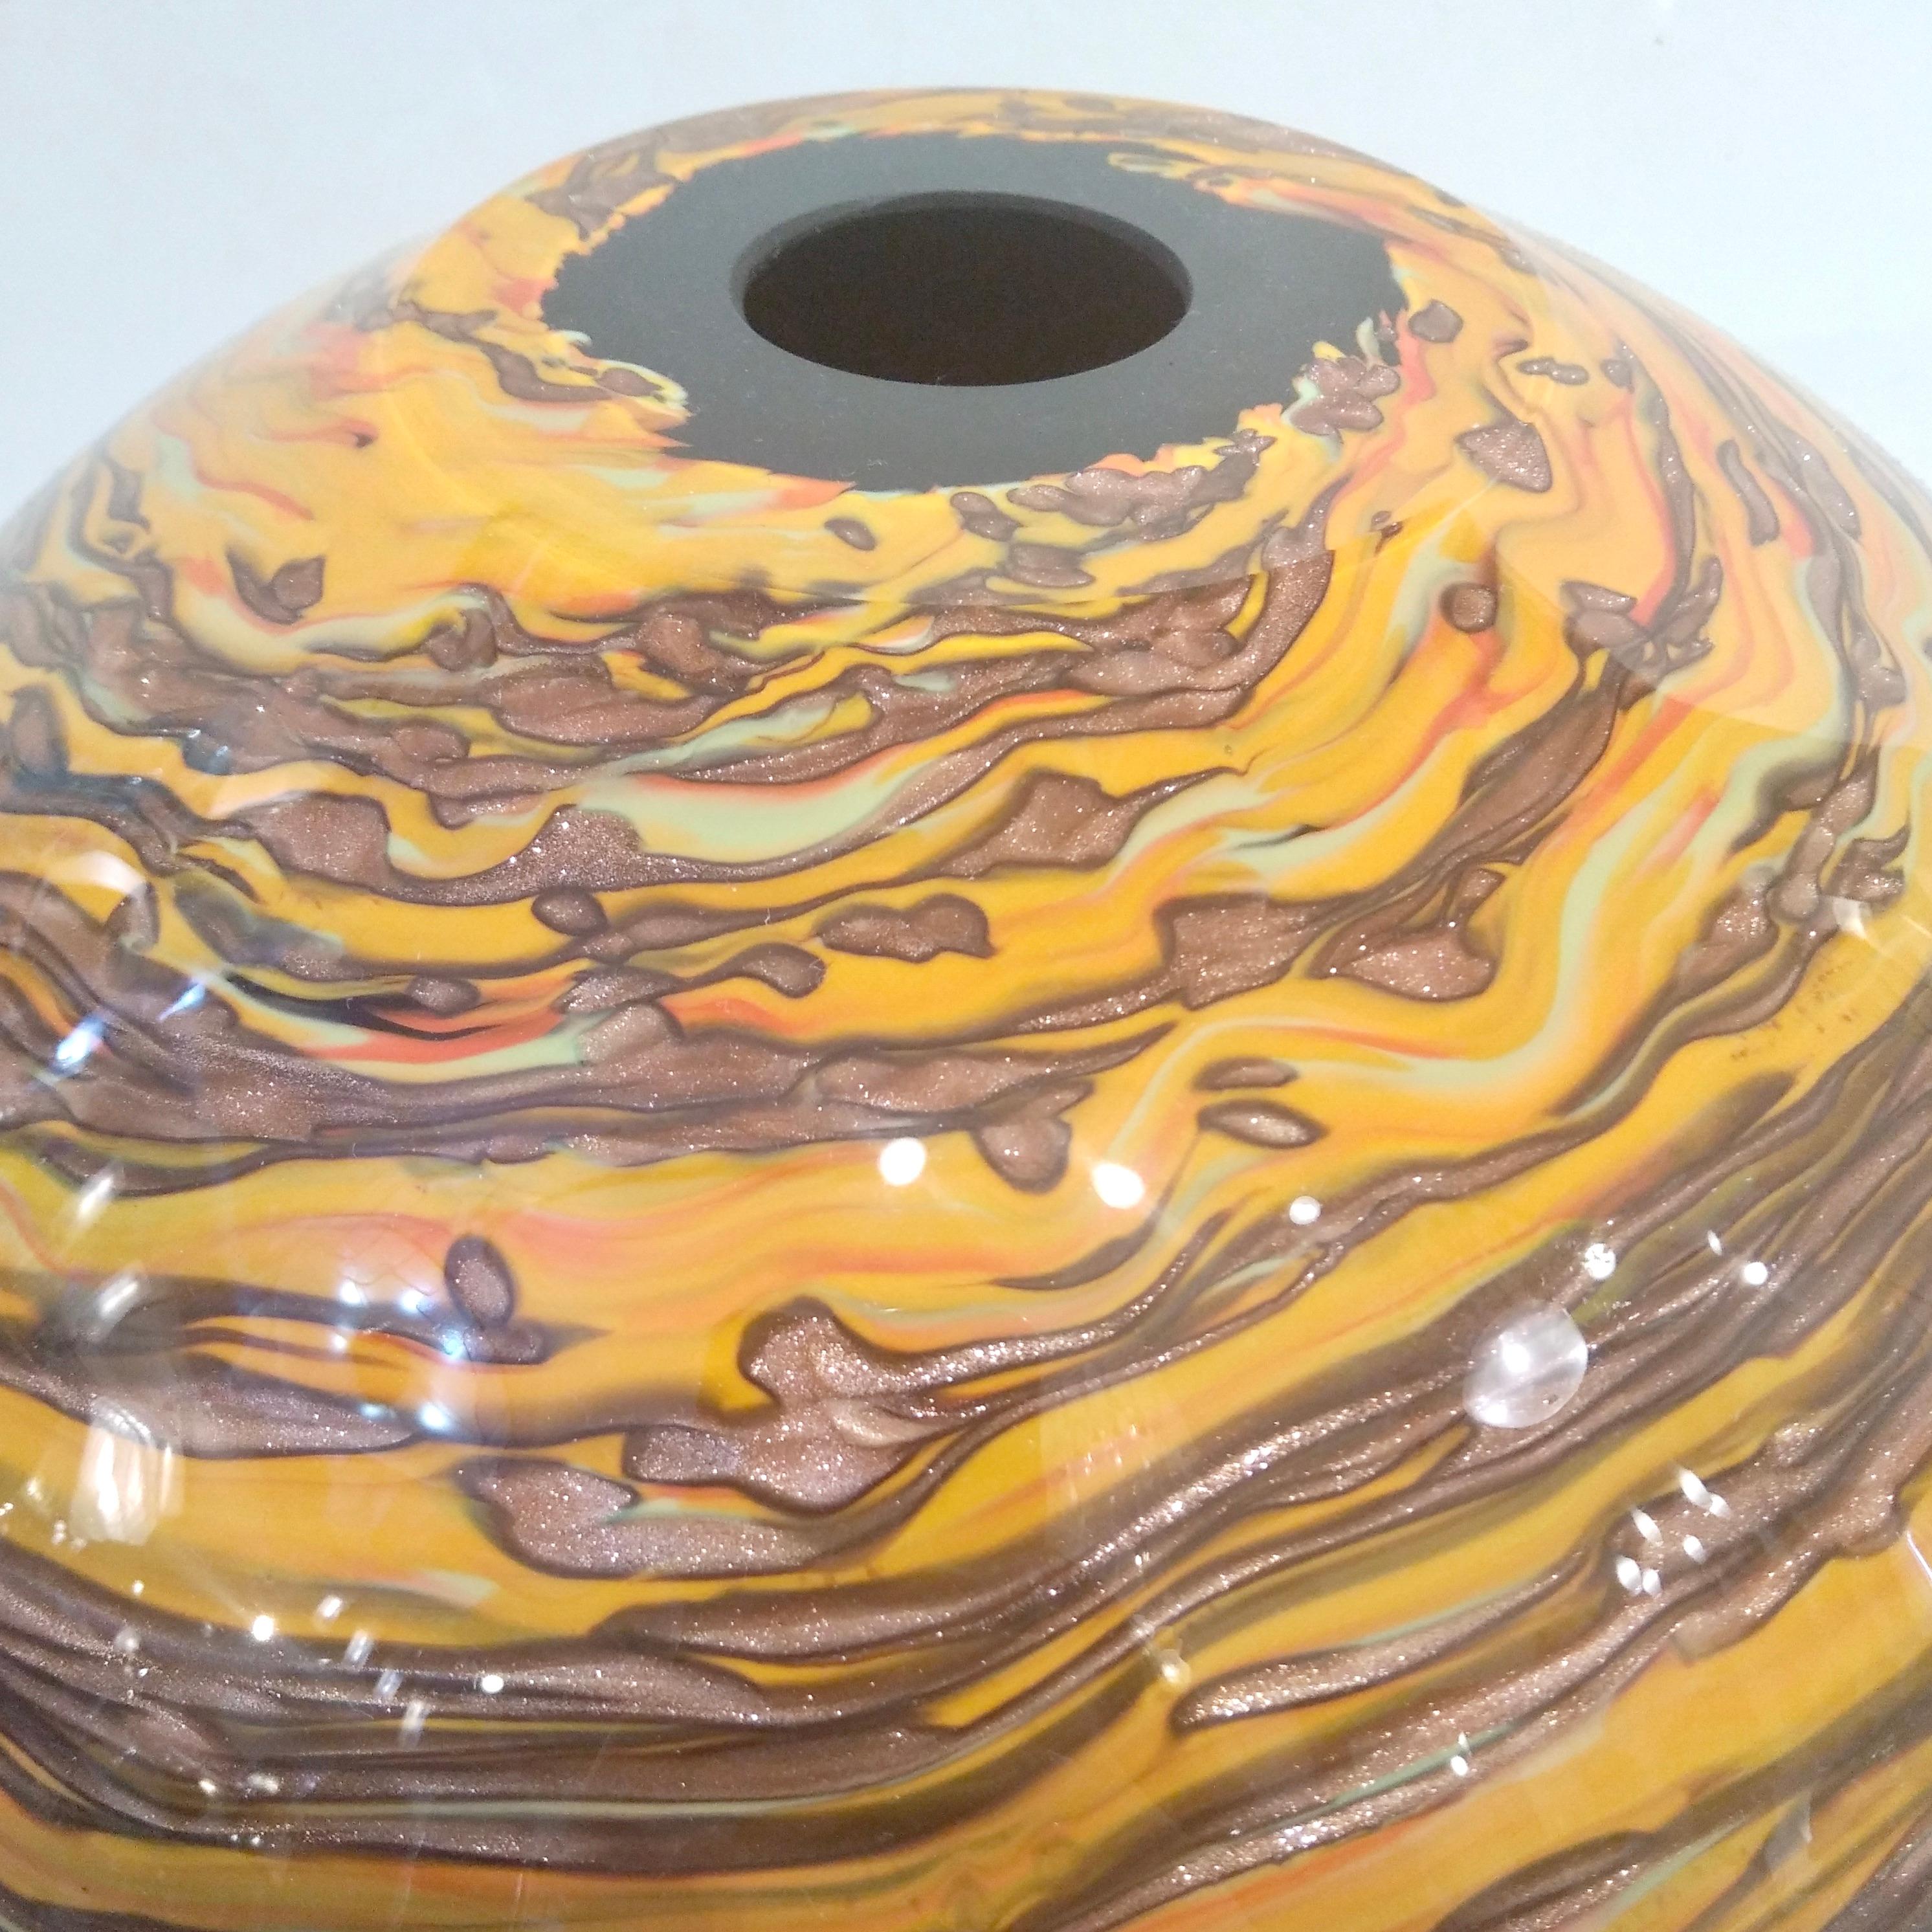 Formia 1980s Modern Round Brown Yellow Red Orange Gold Murano Glass Vase For Sale 1